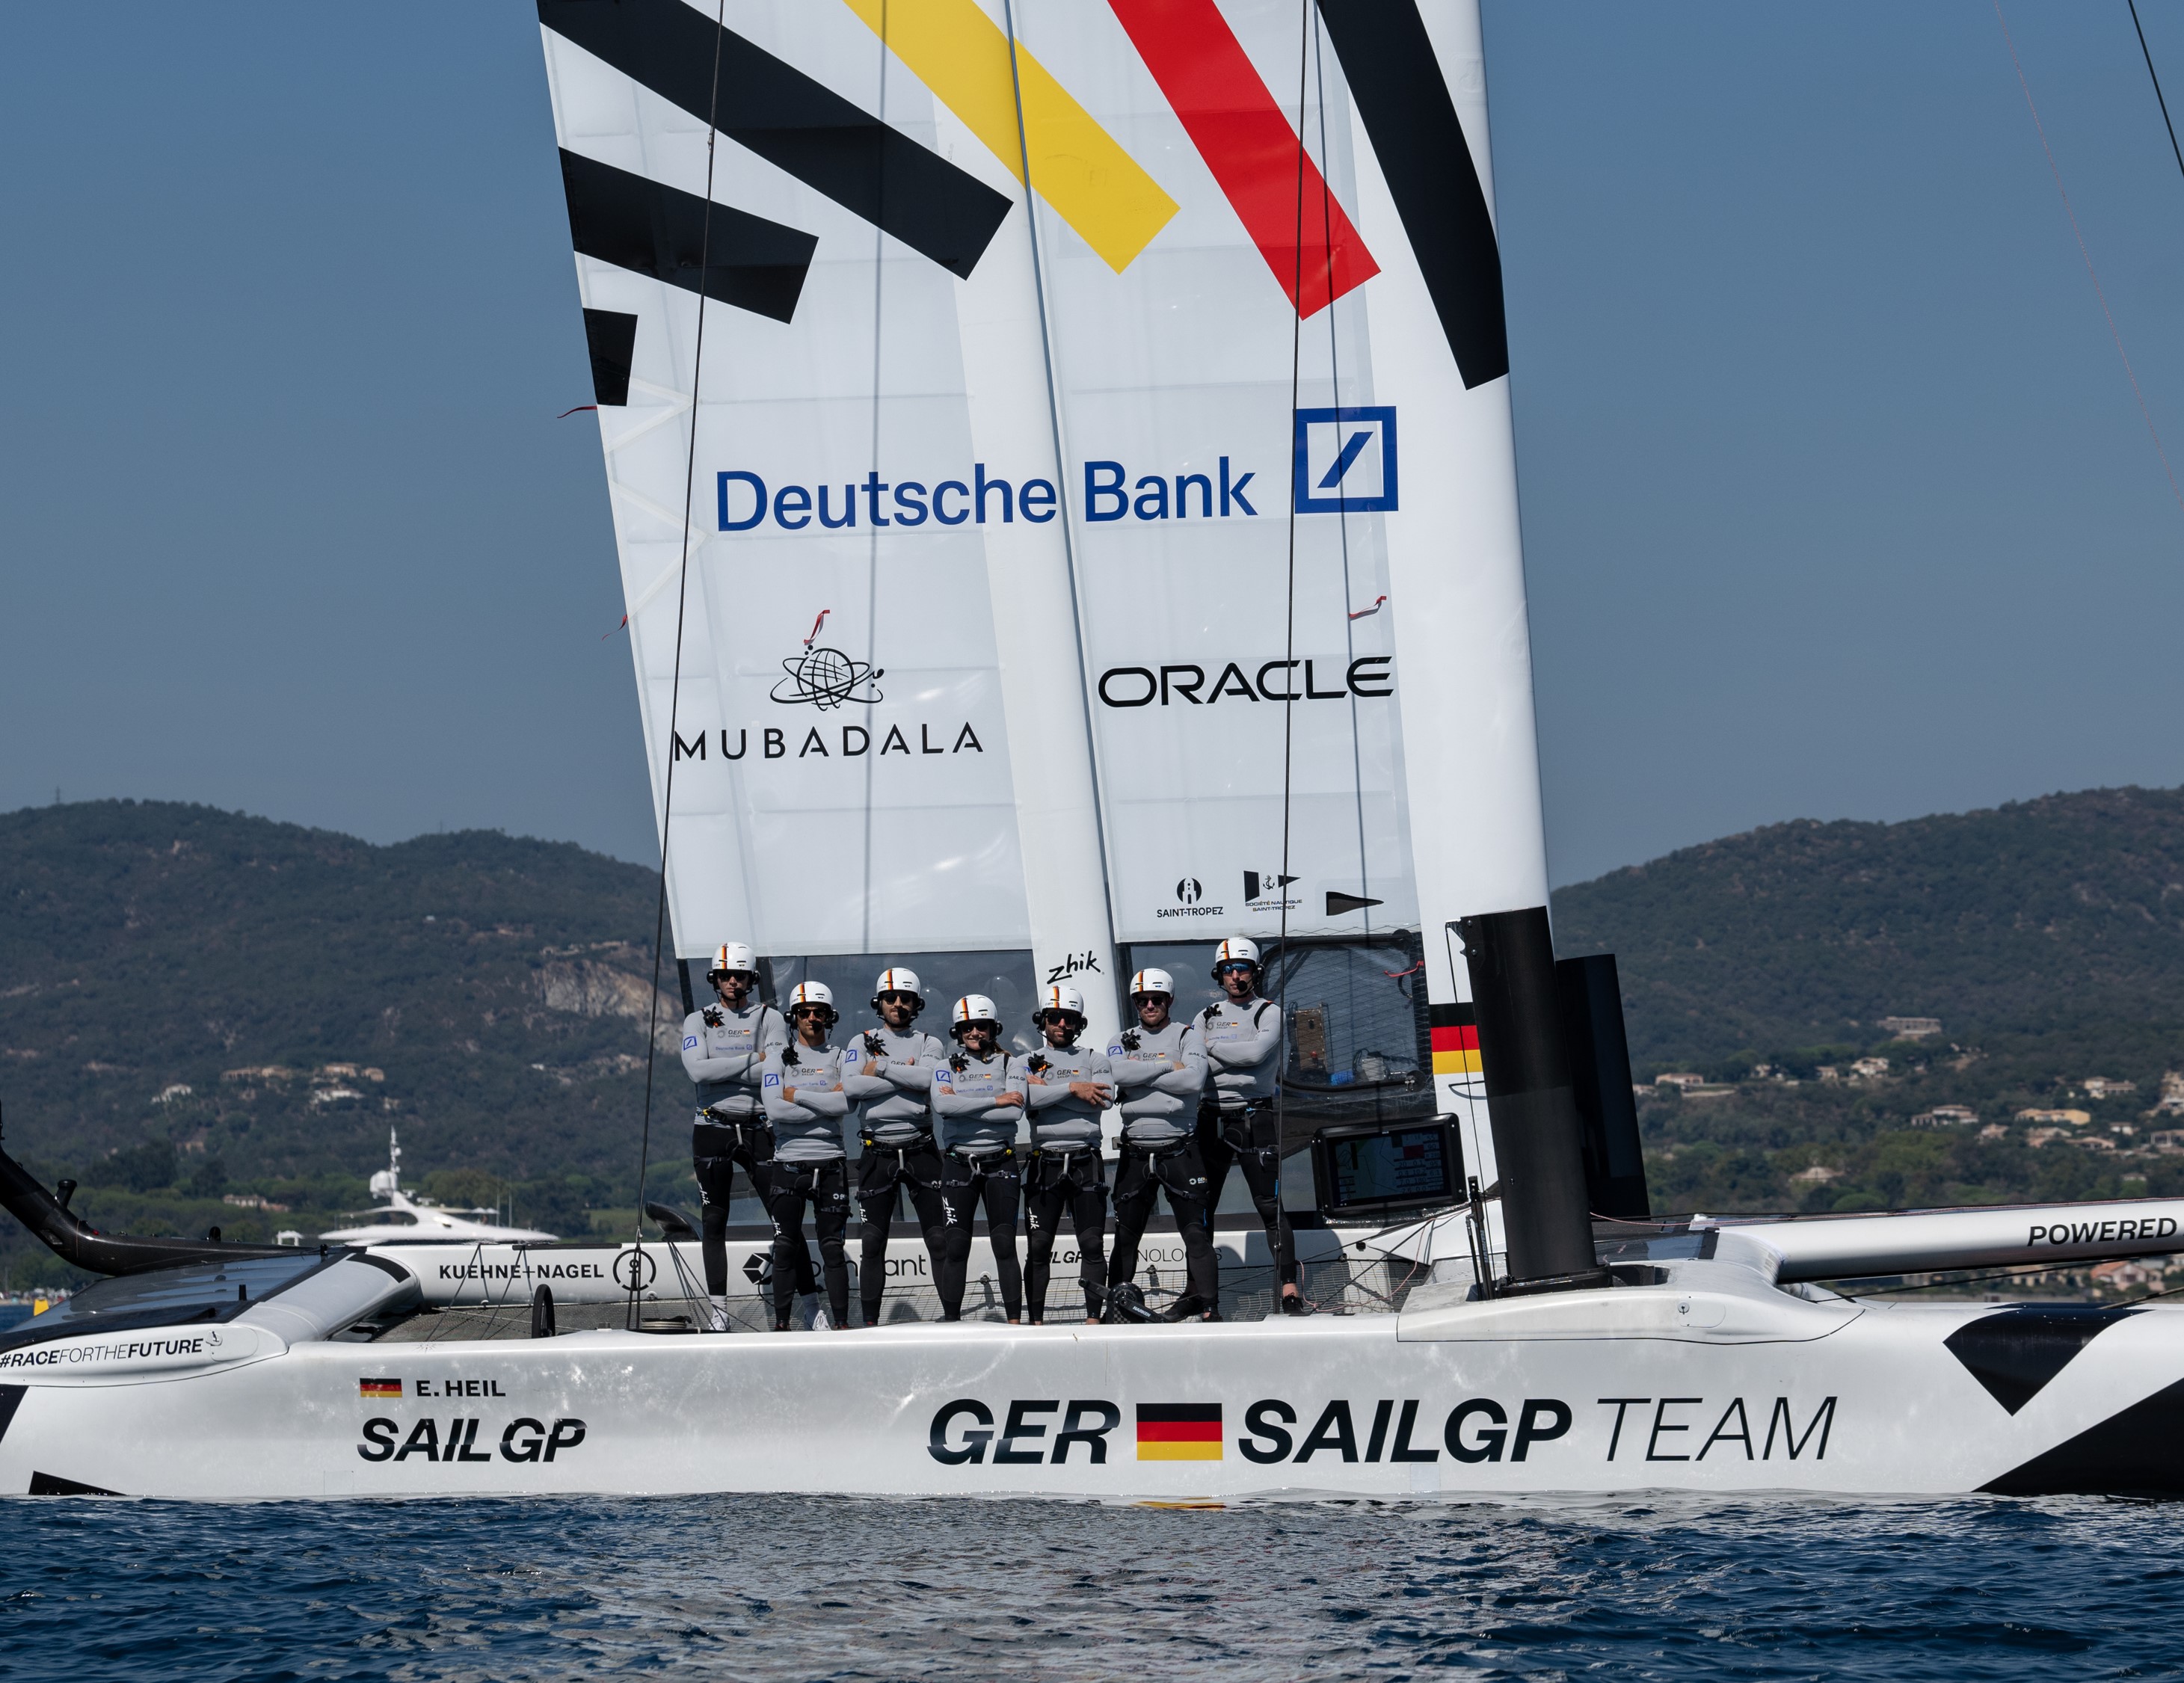 About the Germany SailGP Team